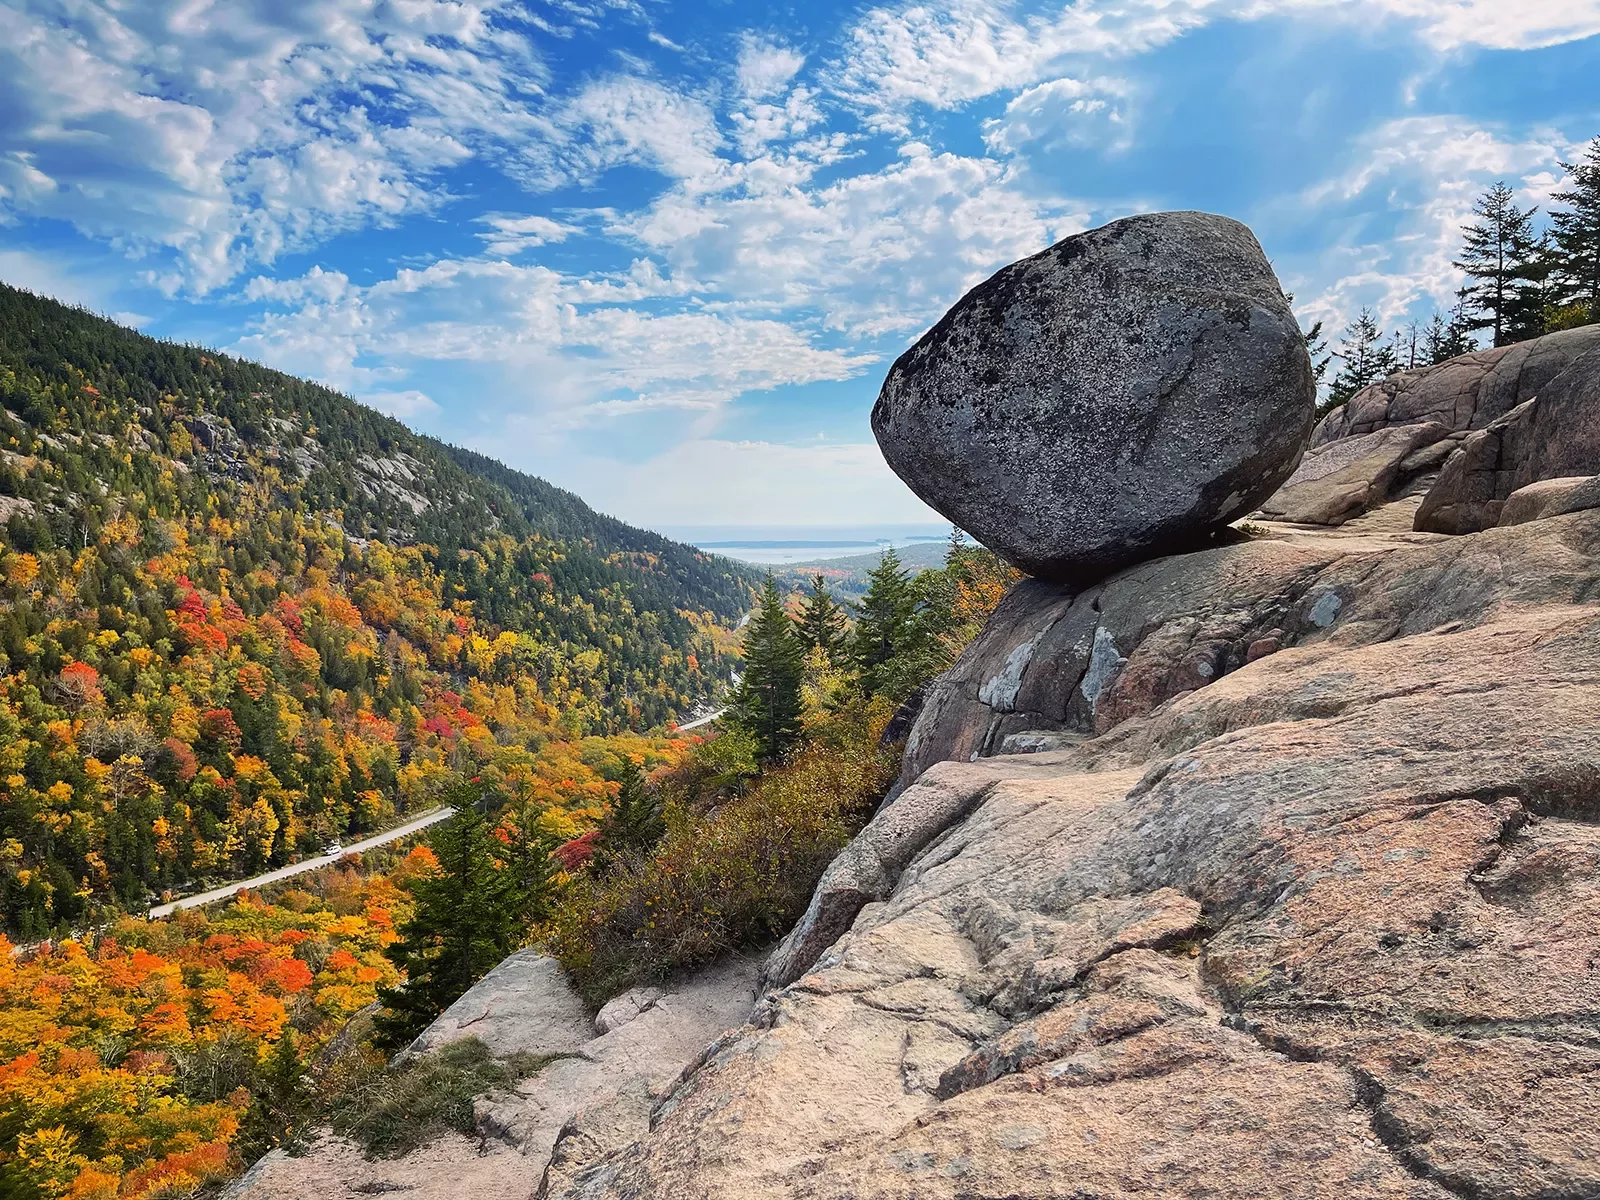 Boulder on a rocky edge overlooking trees